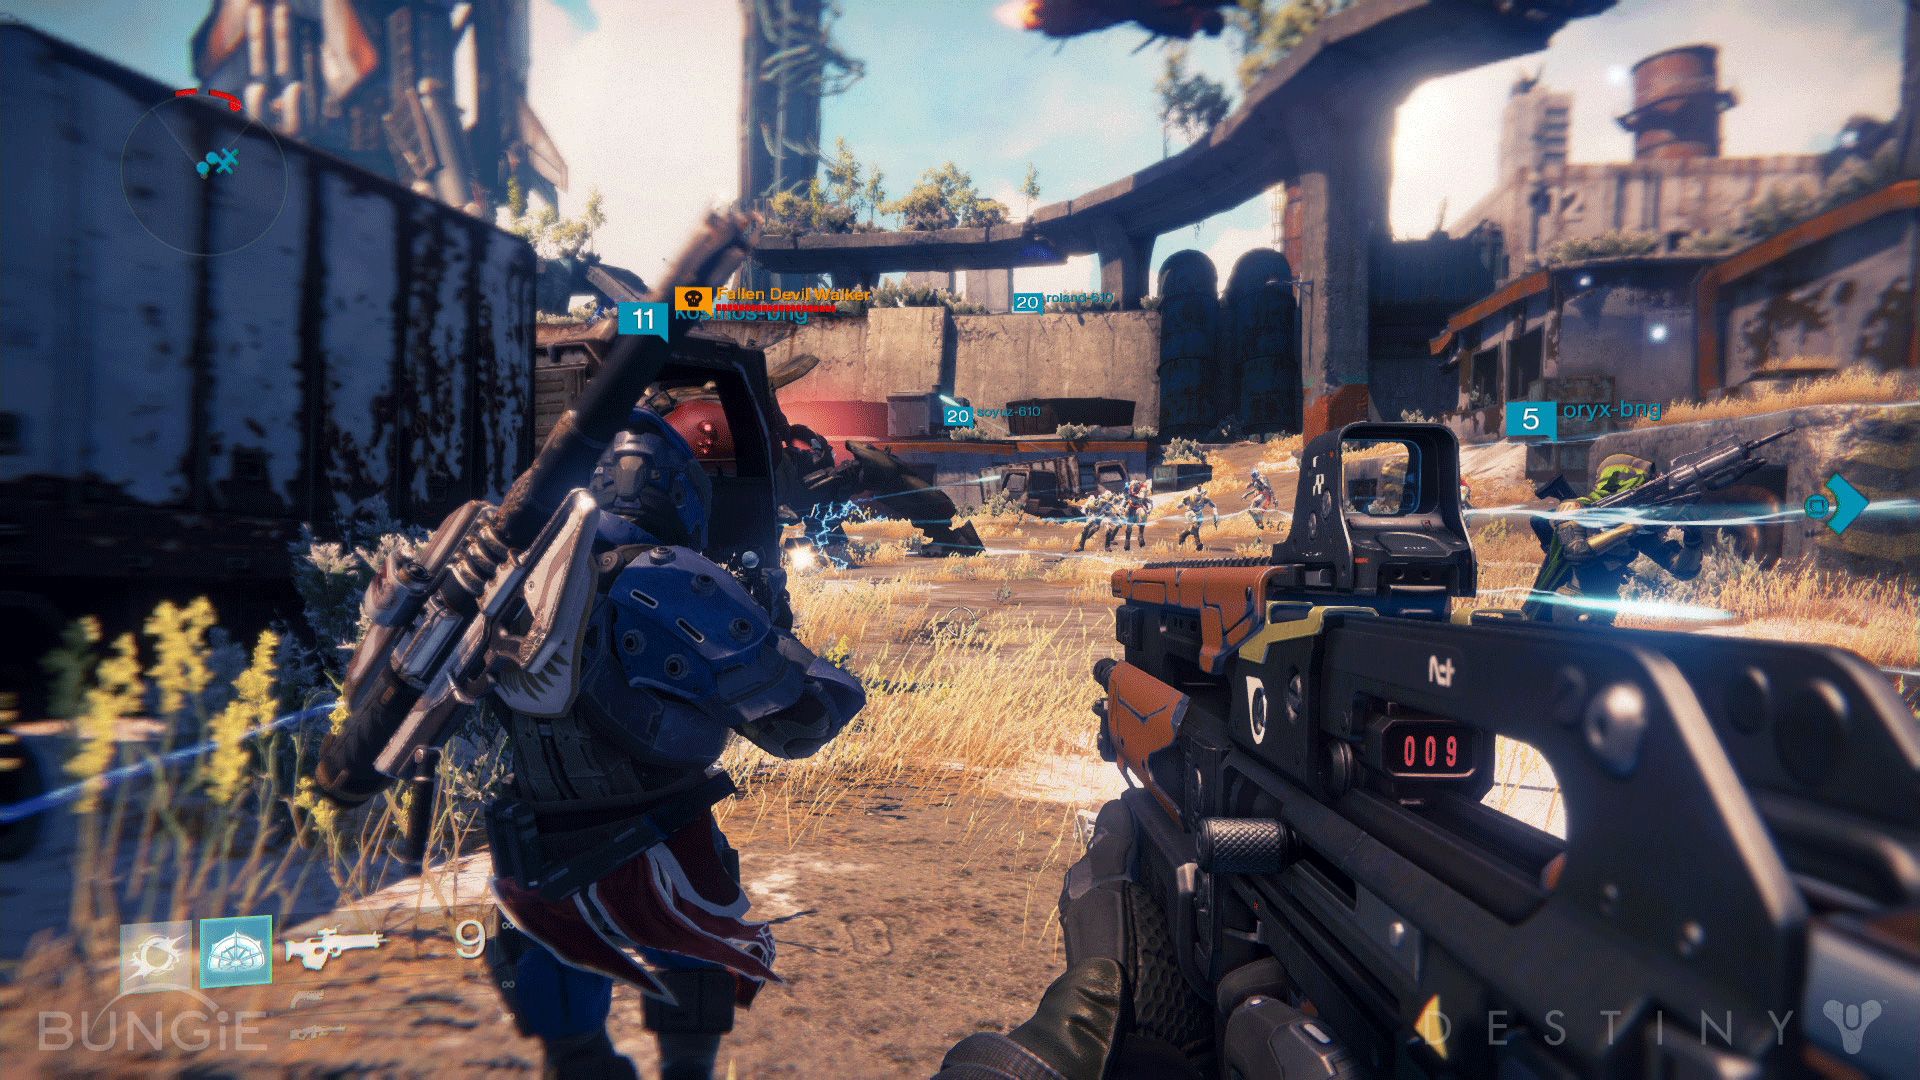 destiny gameplay preview trailer and screens image 6